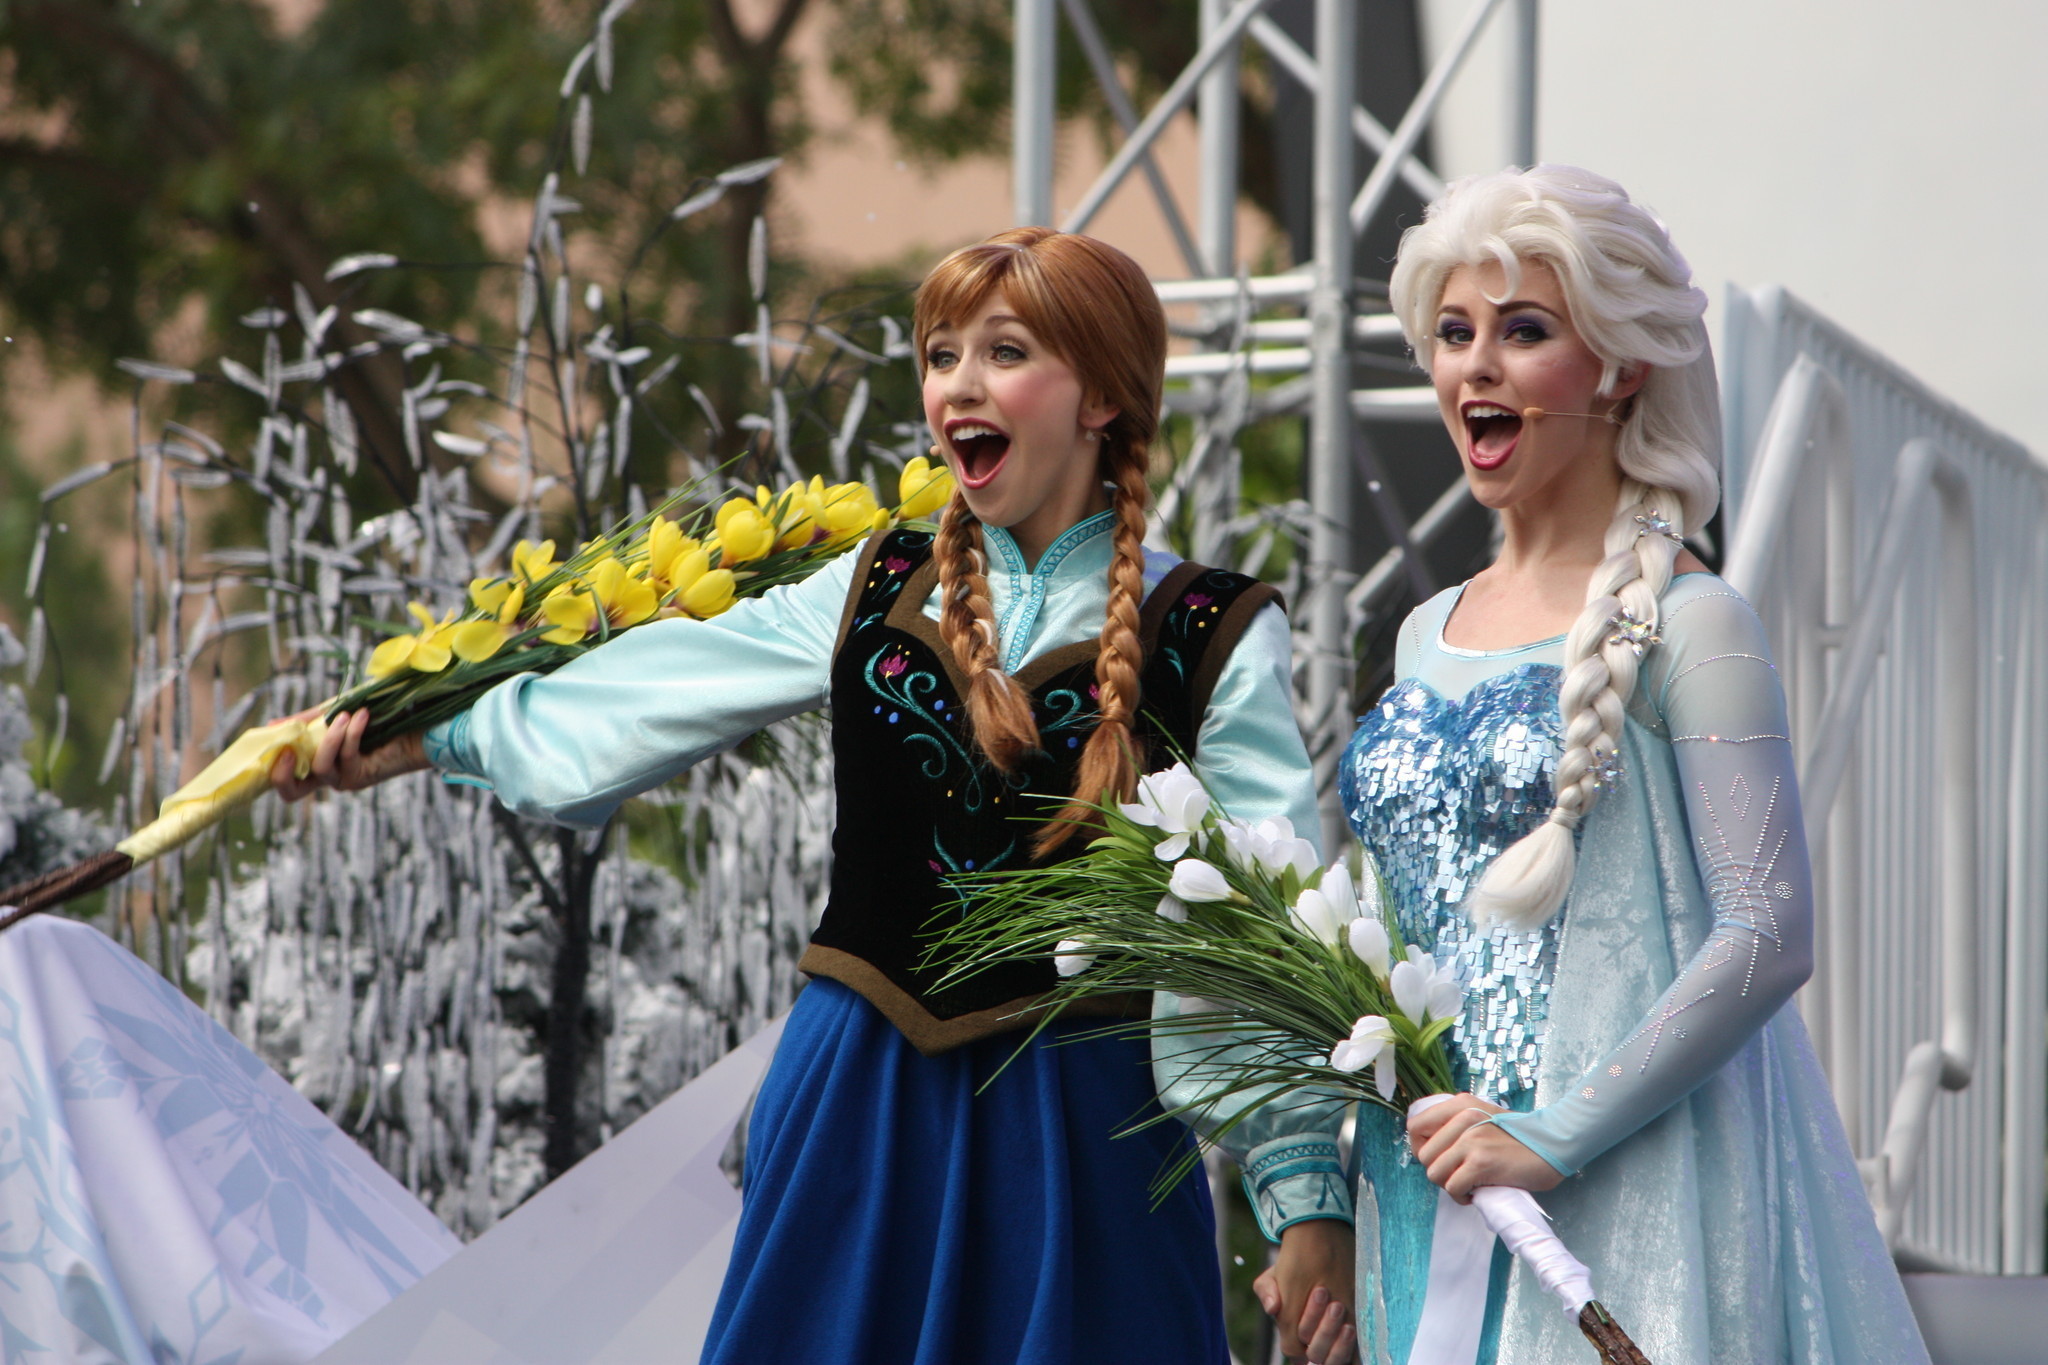 5 reasons to check out Frozen Summer Fun during the extra month